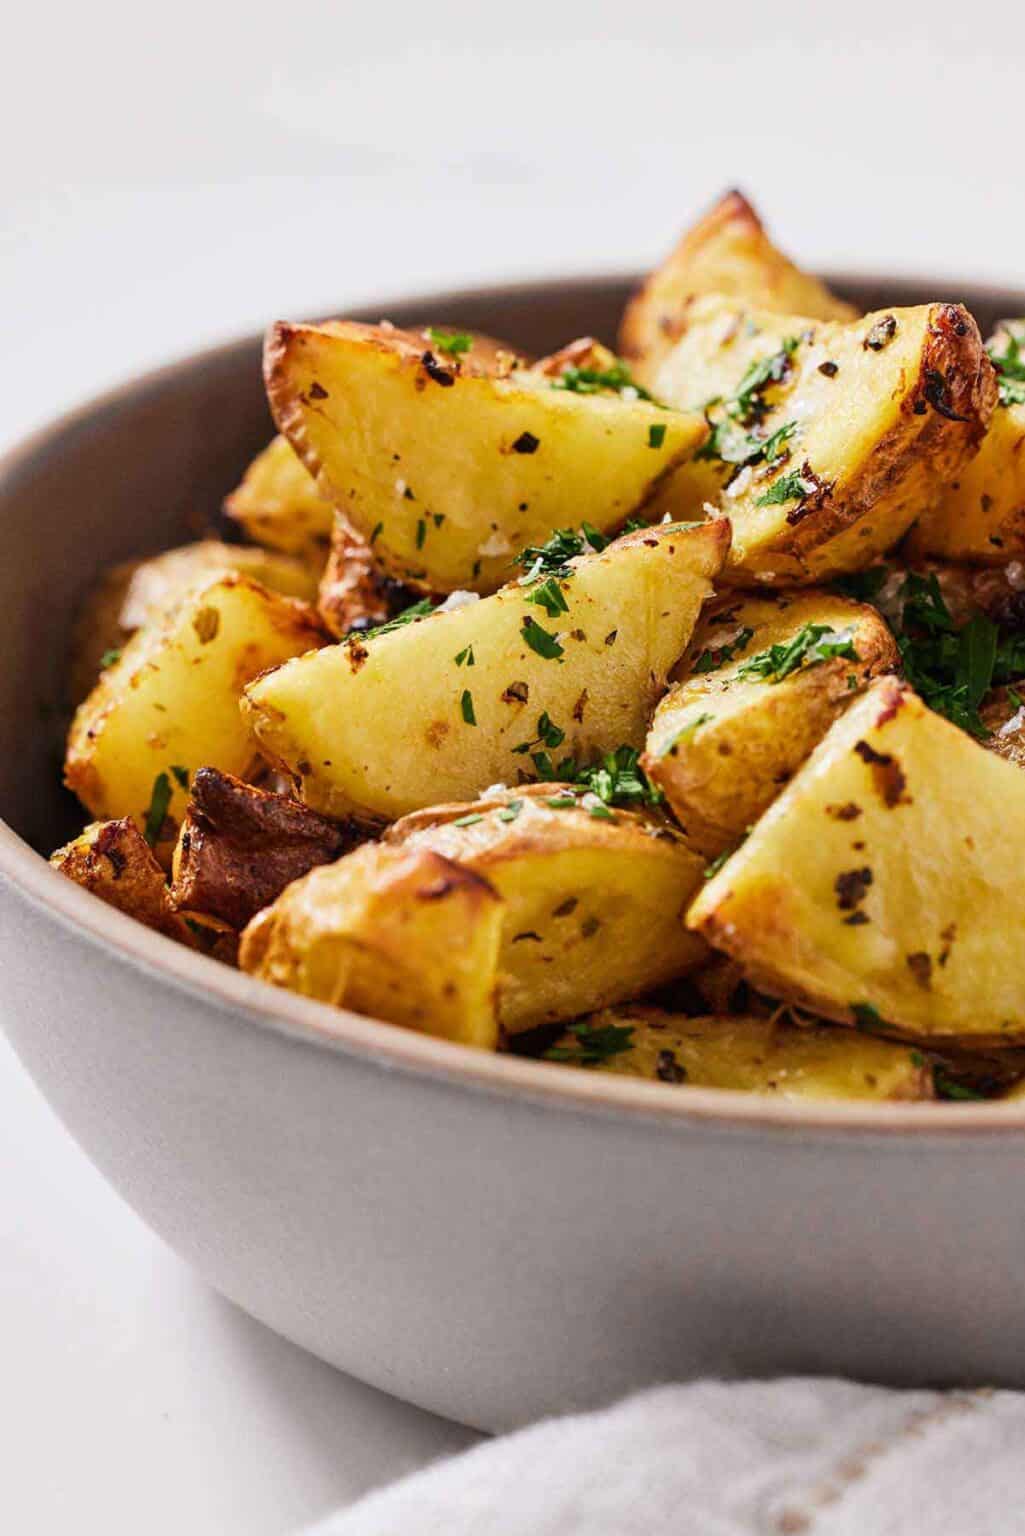 Air Fryer Greek Lemon Potatoes - Cooking With Coit